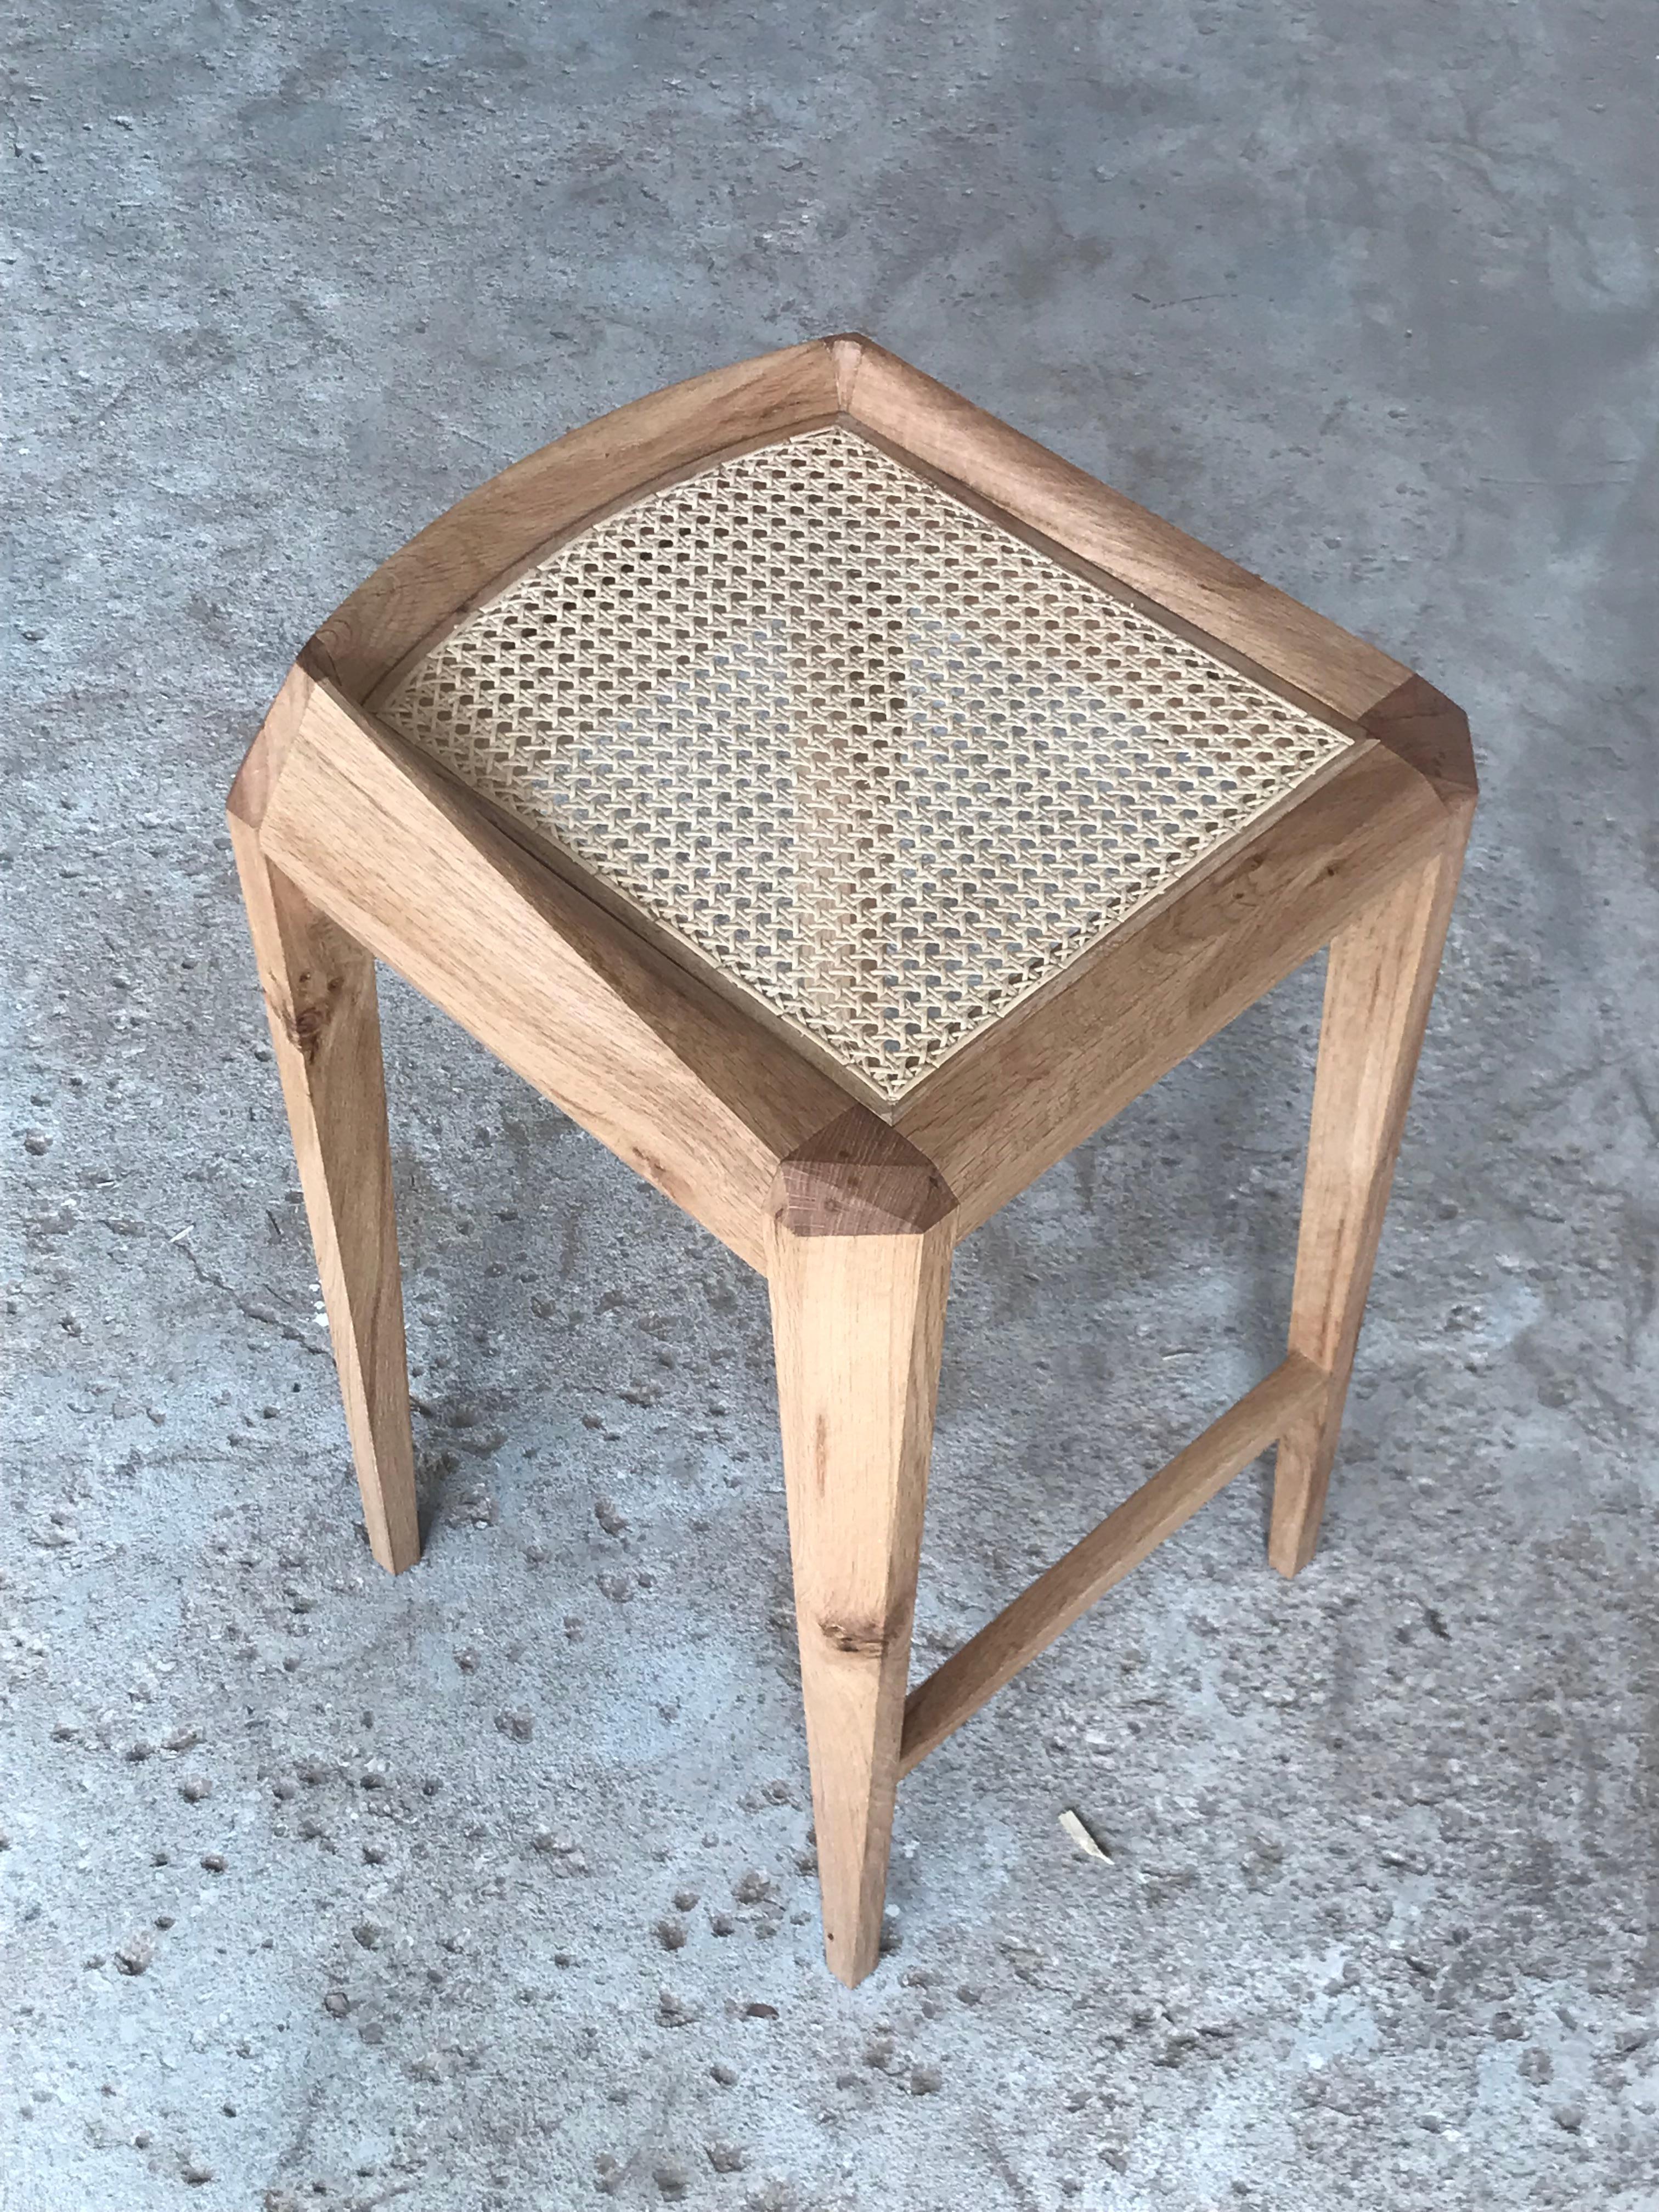 KD Stool a Sculptural Rattan Weaved Top Bar Stool by Tomaz Viana For Sale 1